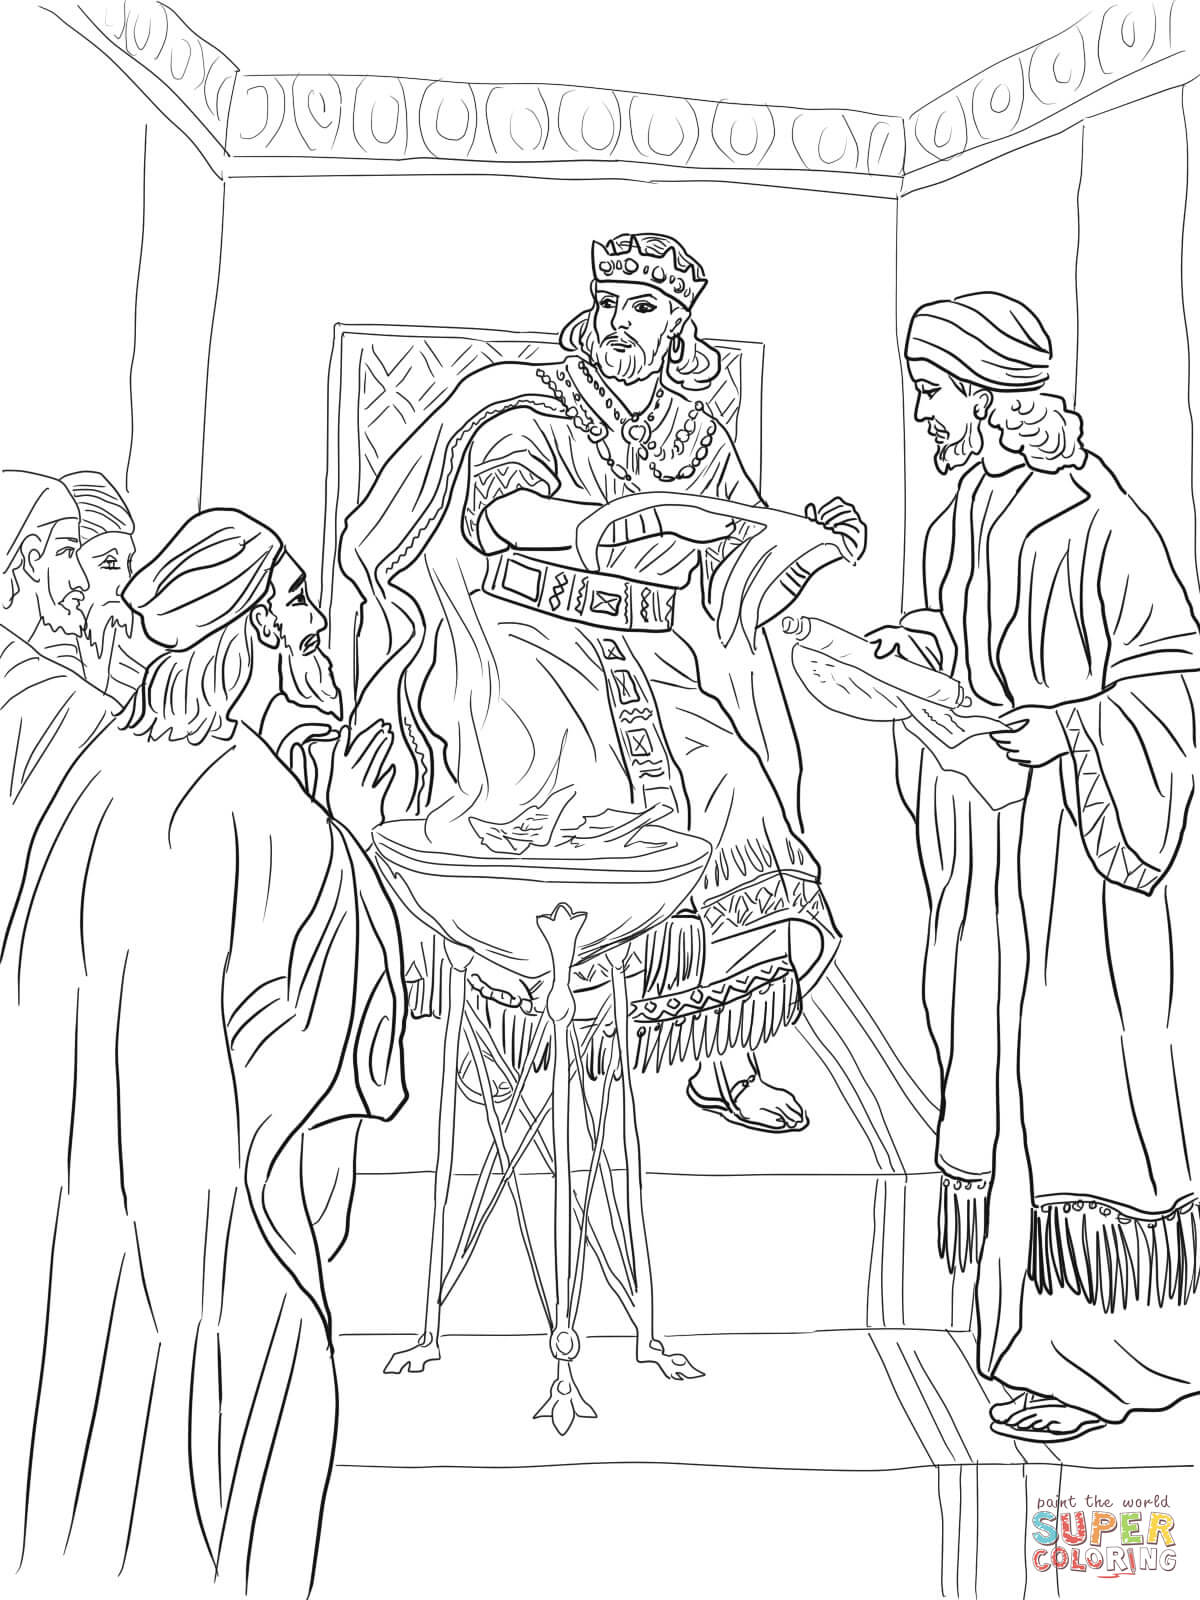 King Jehoiakim Burns Jeremiah's Scroll coloring page | Free ...